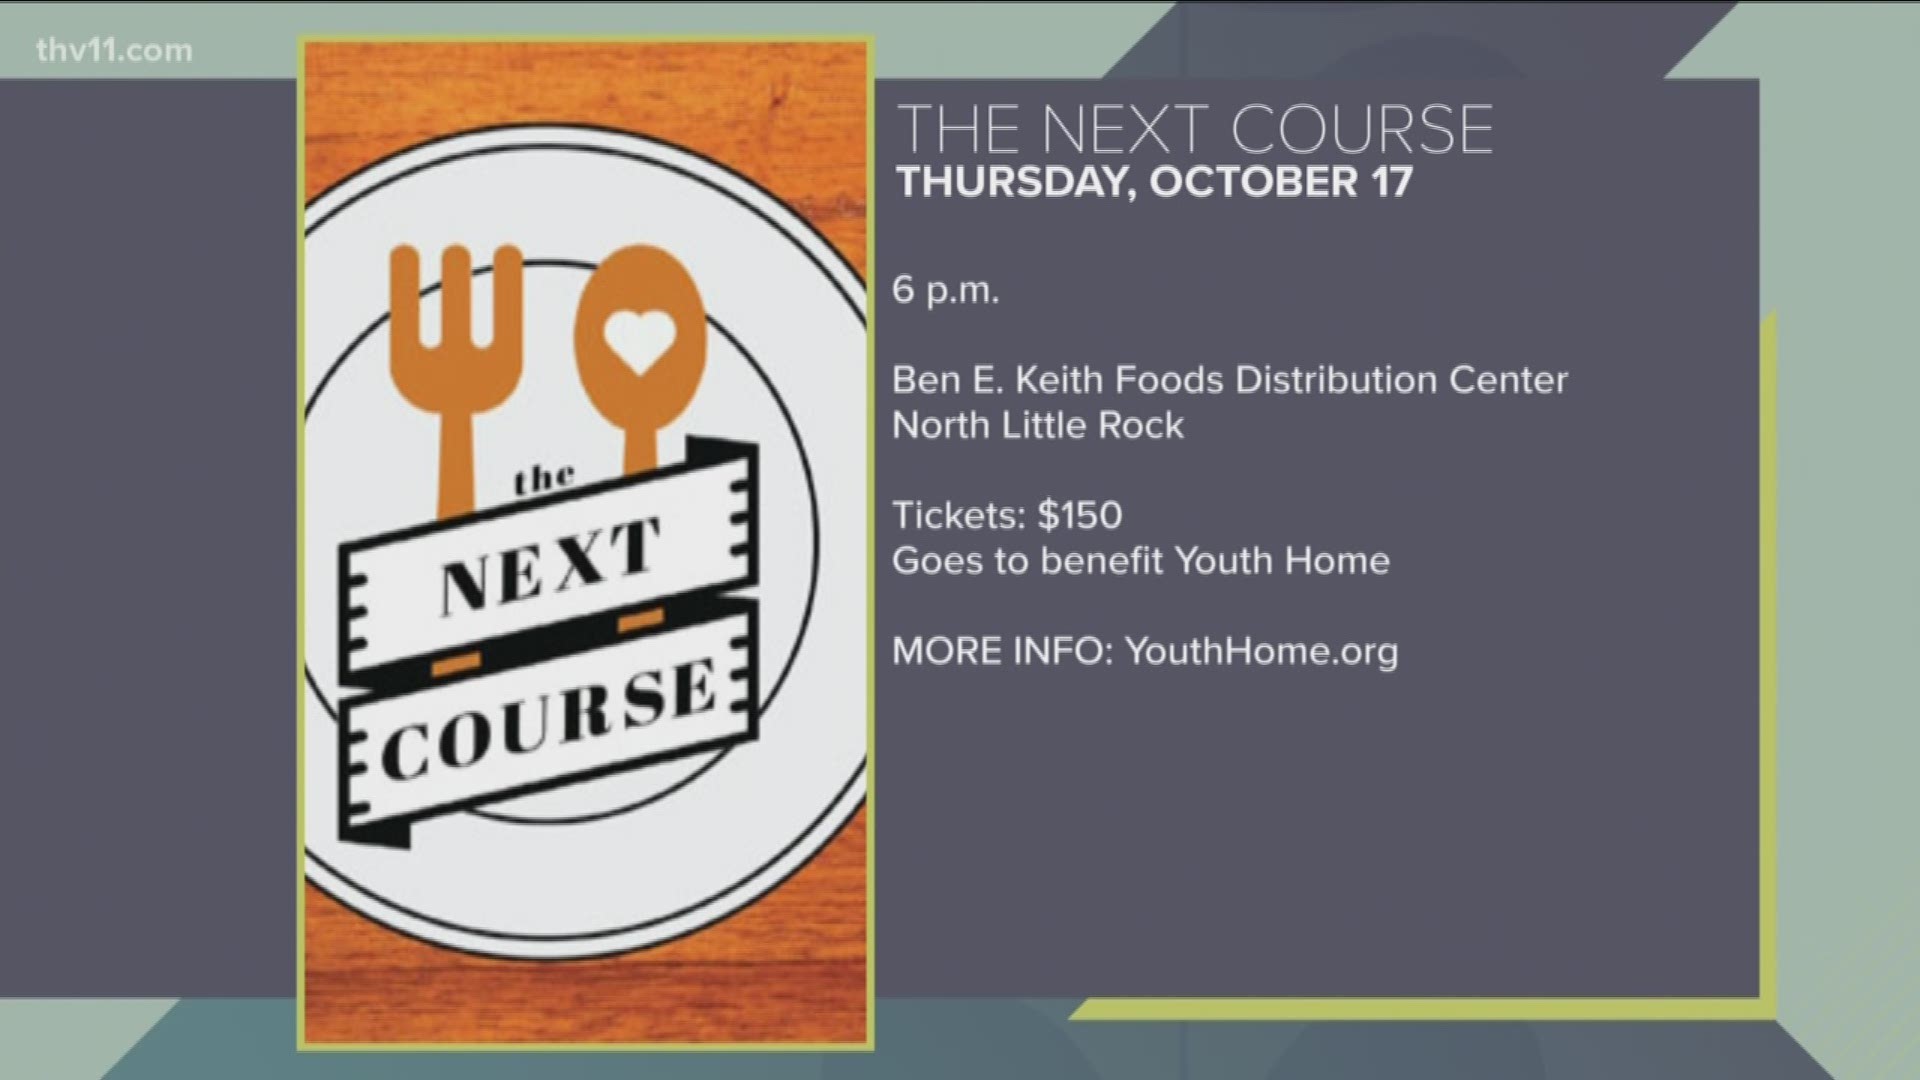 'The Next Course' will be Thursday, October 17th at 6 p.m. at Ben E. Keith Foods in North Little Rock.